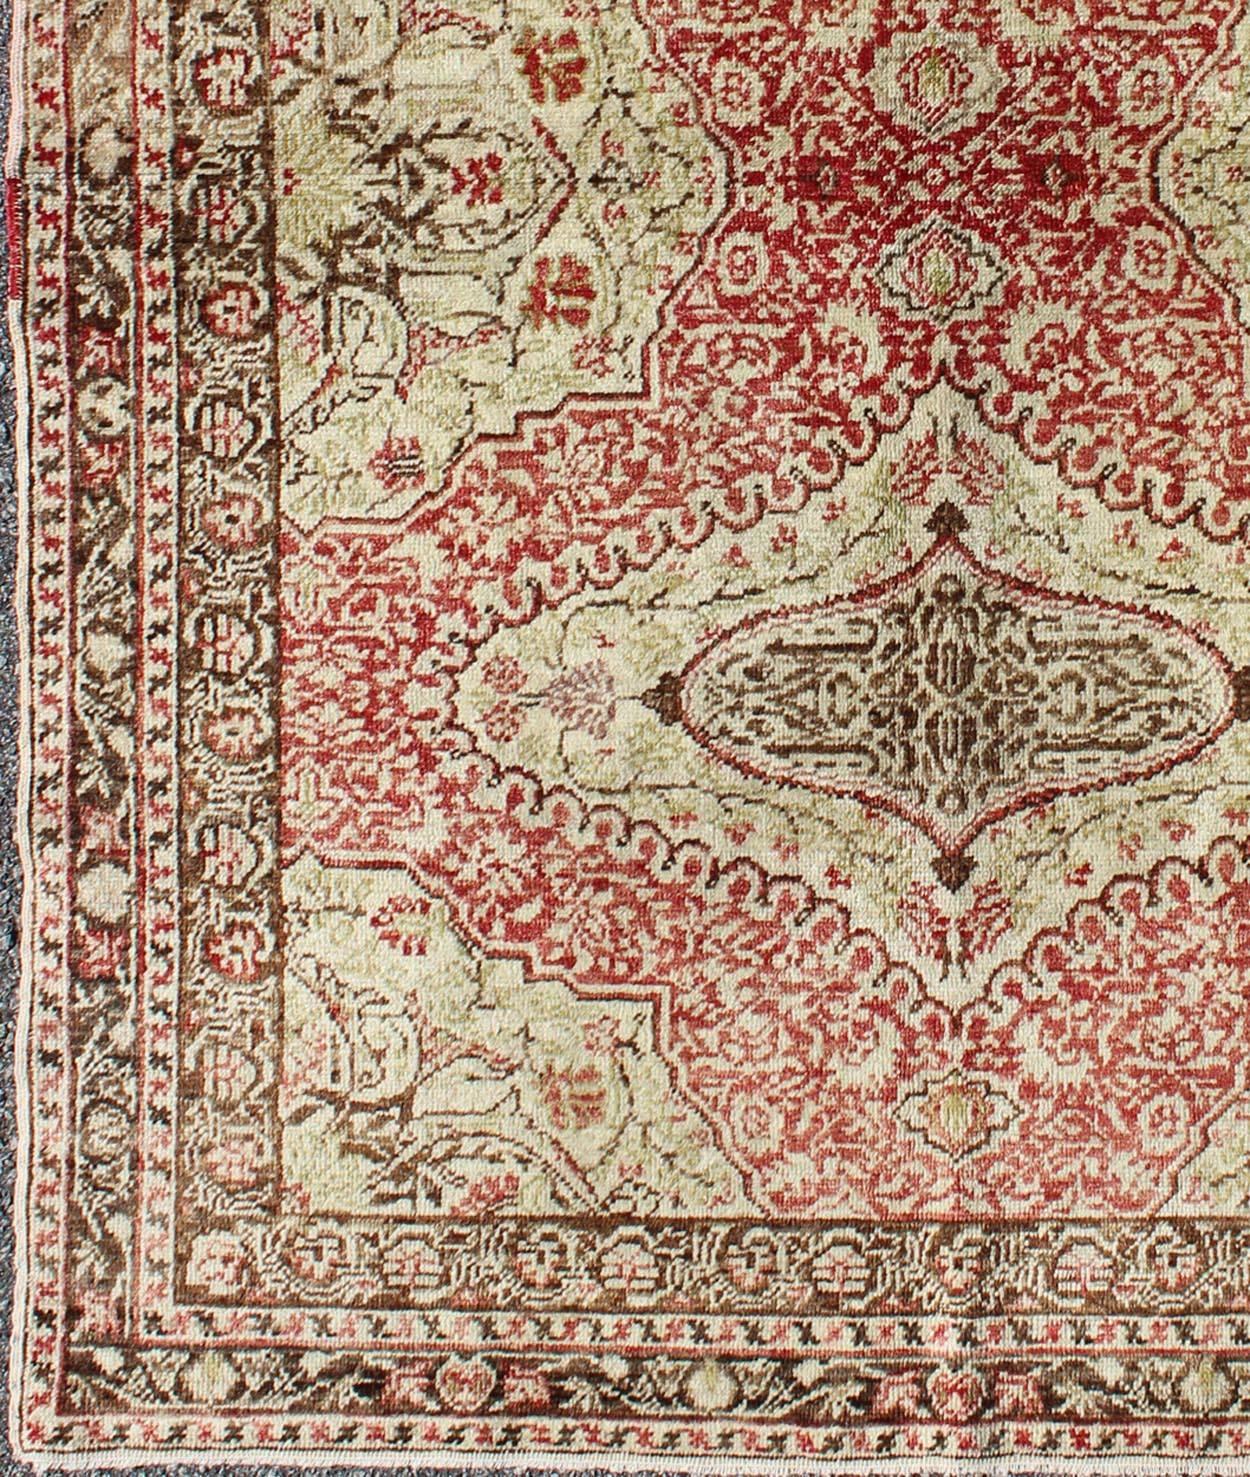 Fine Turkish Sivas Rug with Classic Medallion Design
rug/na-63179,  origin/turkey

Sivas carpets are made with classically-derived  patterns of medallions and all-over designs utilizing palmettes and vine scrolls. This exquisite, Classic